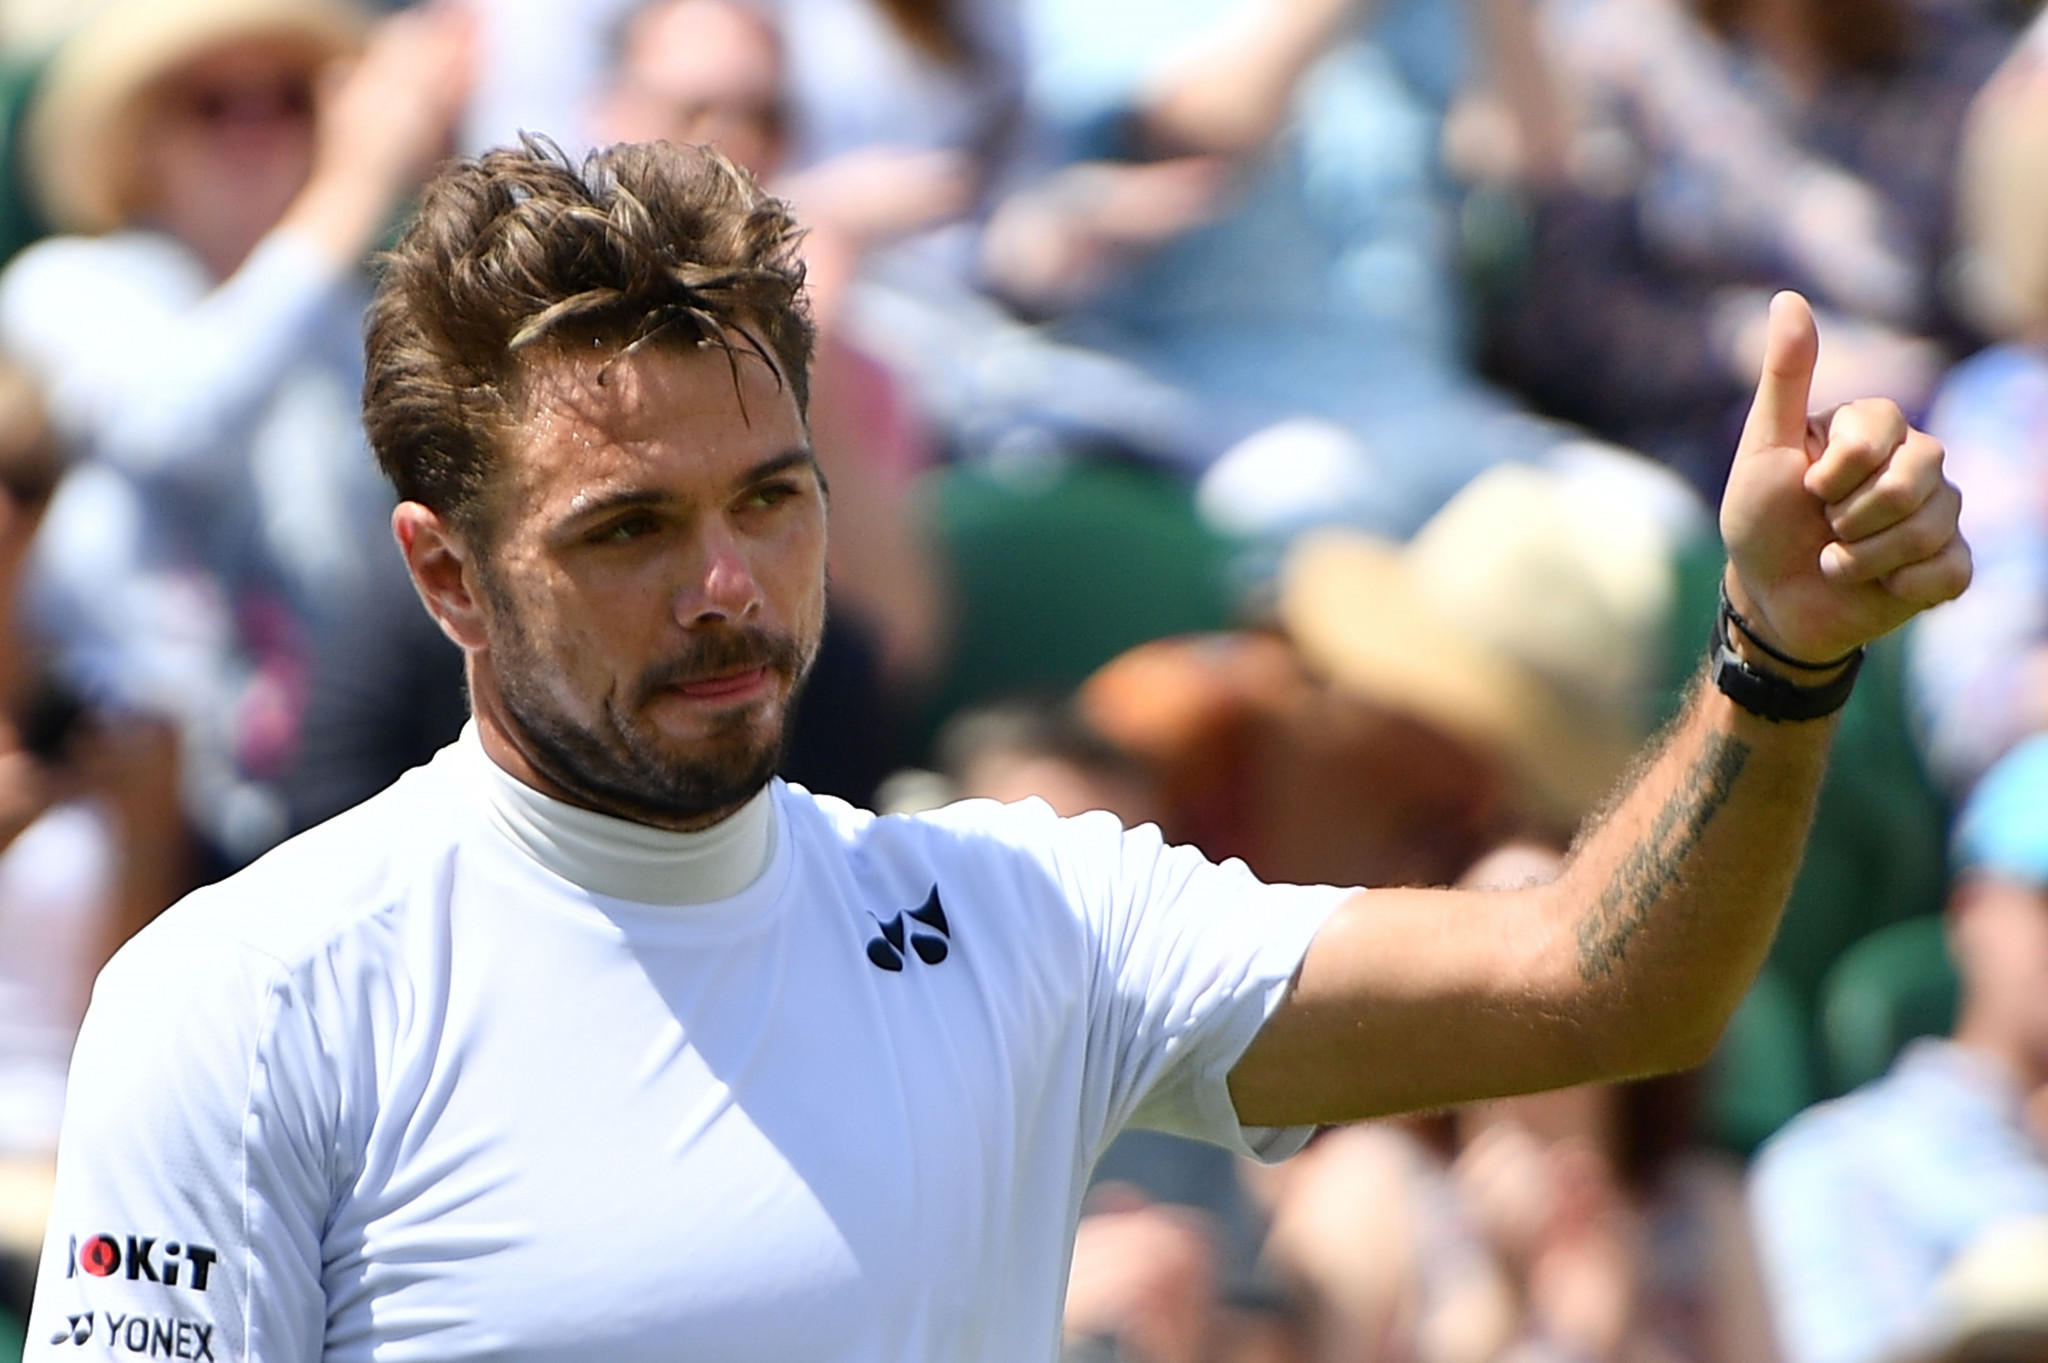 Switzerland's Stan Wawrinka enjoyed a comfortable first day of the event ©Getty Images